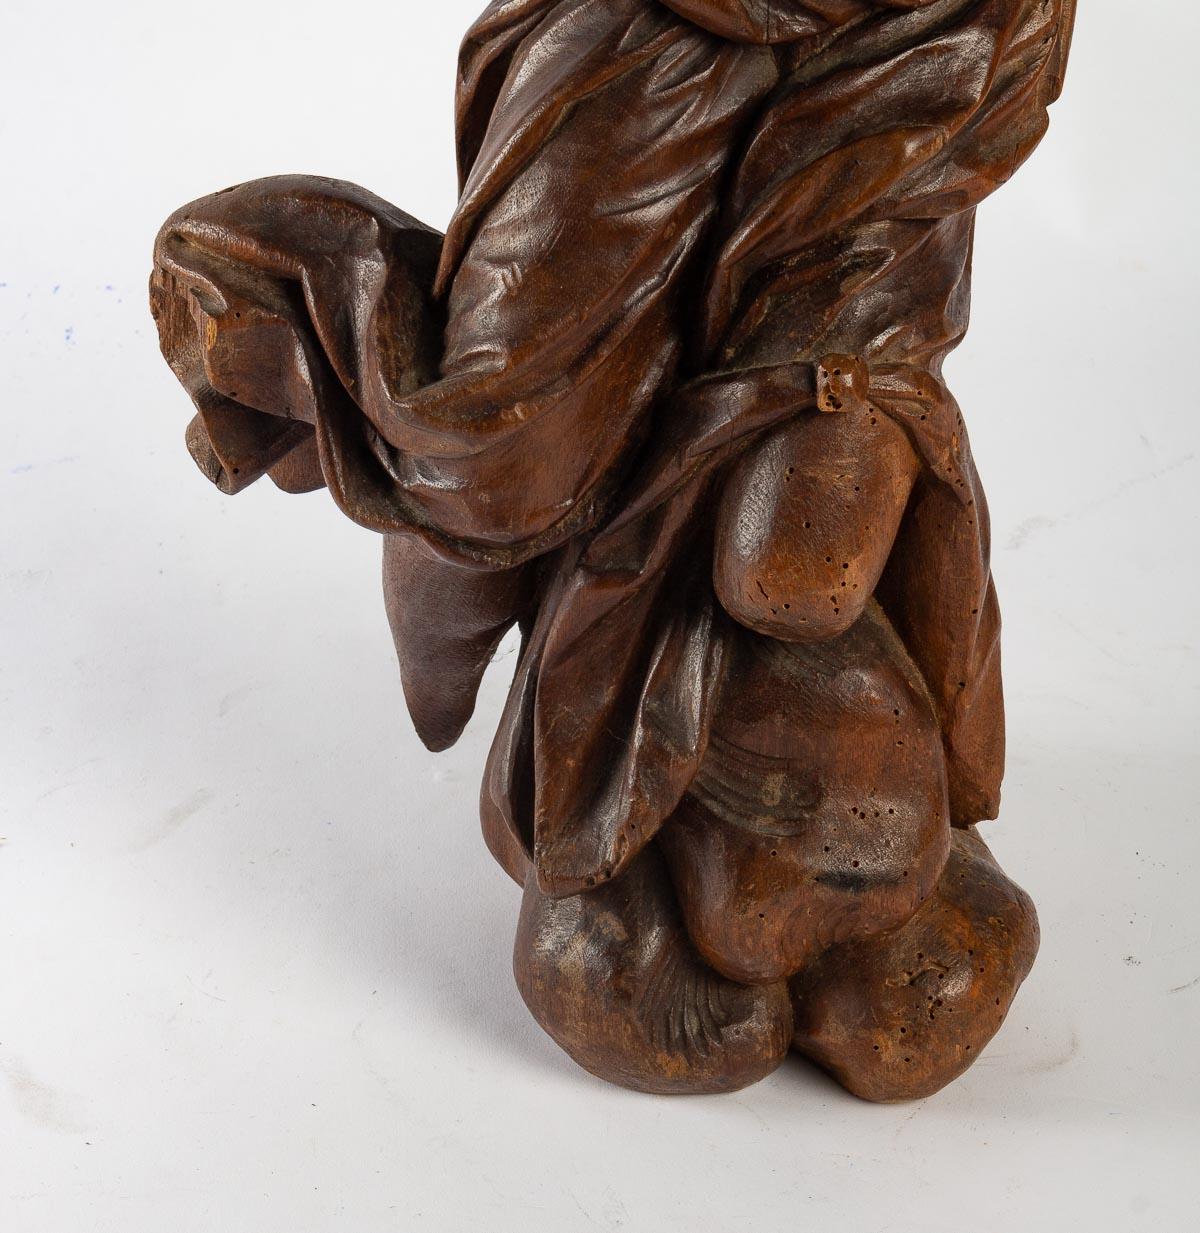 Carved wood sculpture from the 19th century.
Measures: H: 54 cm, W: 26 cm, D: 18 cm.